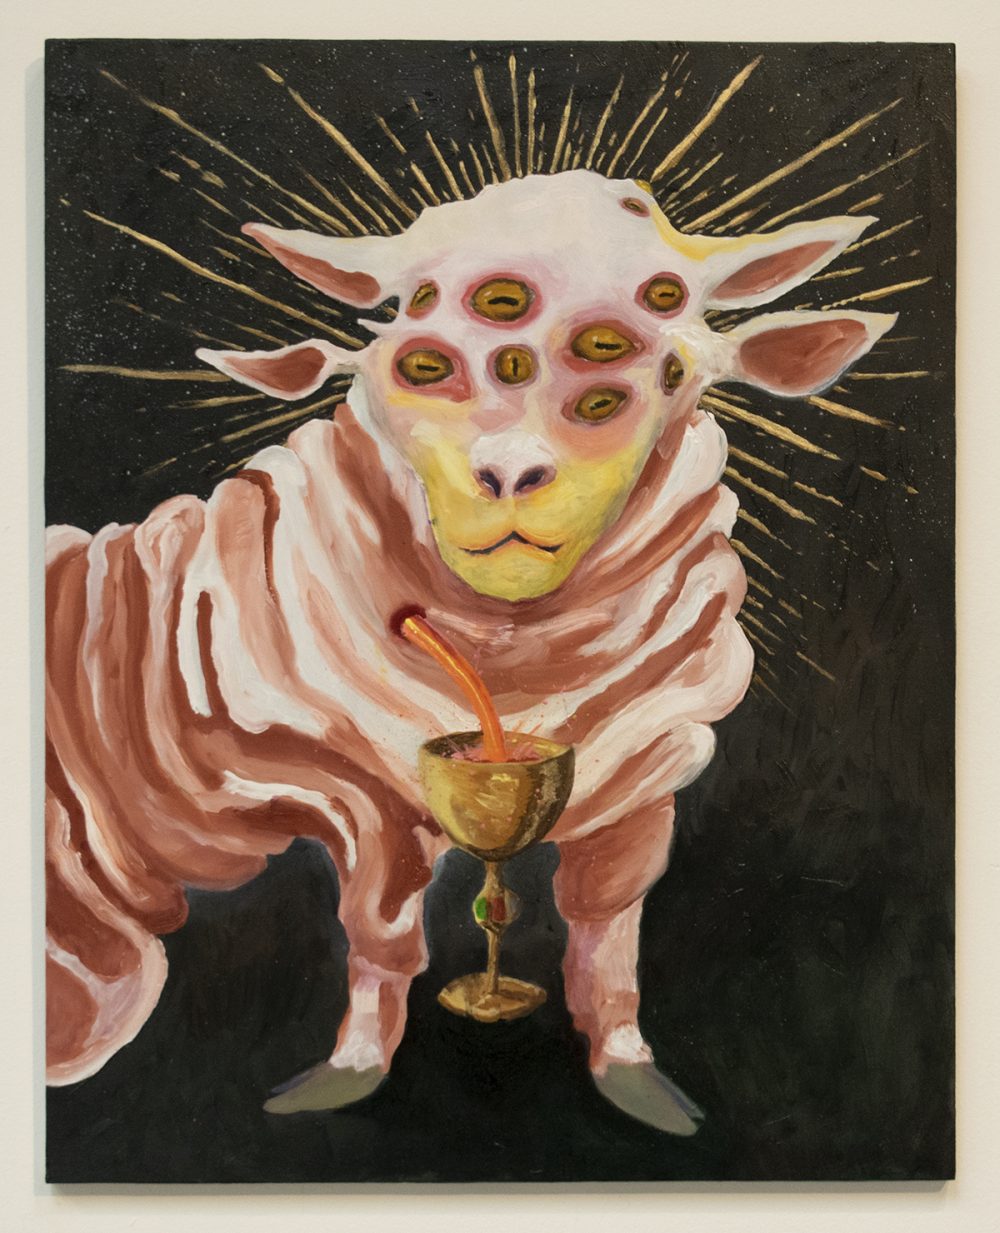 : Oil painting of a mythical animal that has the head and hooves of a sheep, but has two pairs of ears and eight eyes across its forehead. The animal faces the viewer directly, showing its head, front legs and torso, but the rear legs are not seen. A wound on its chest pours orange blood into a golden chalice. Gold rays eminate from its head. The animal is painted in shades of pink, white and yellow and is set on a black background.